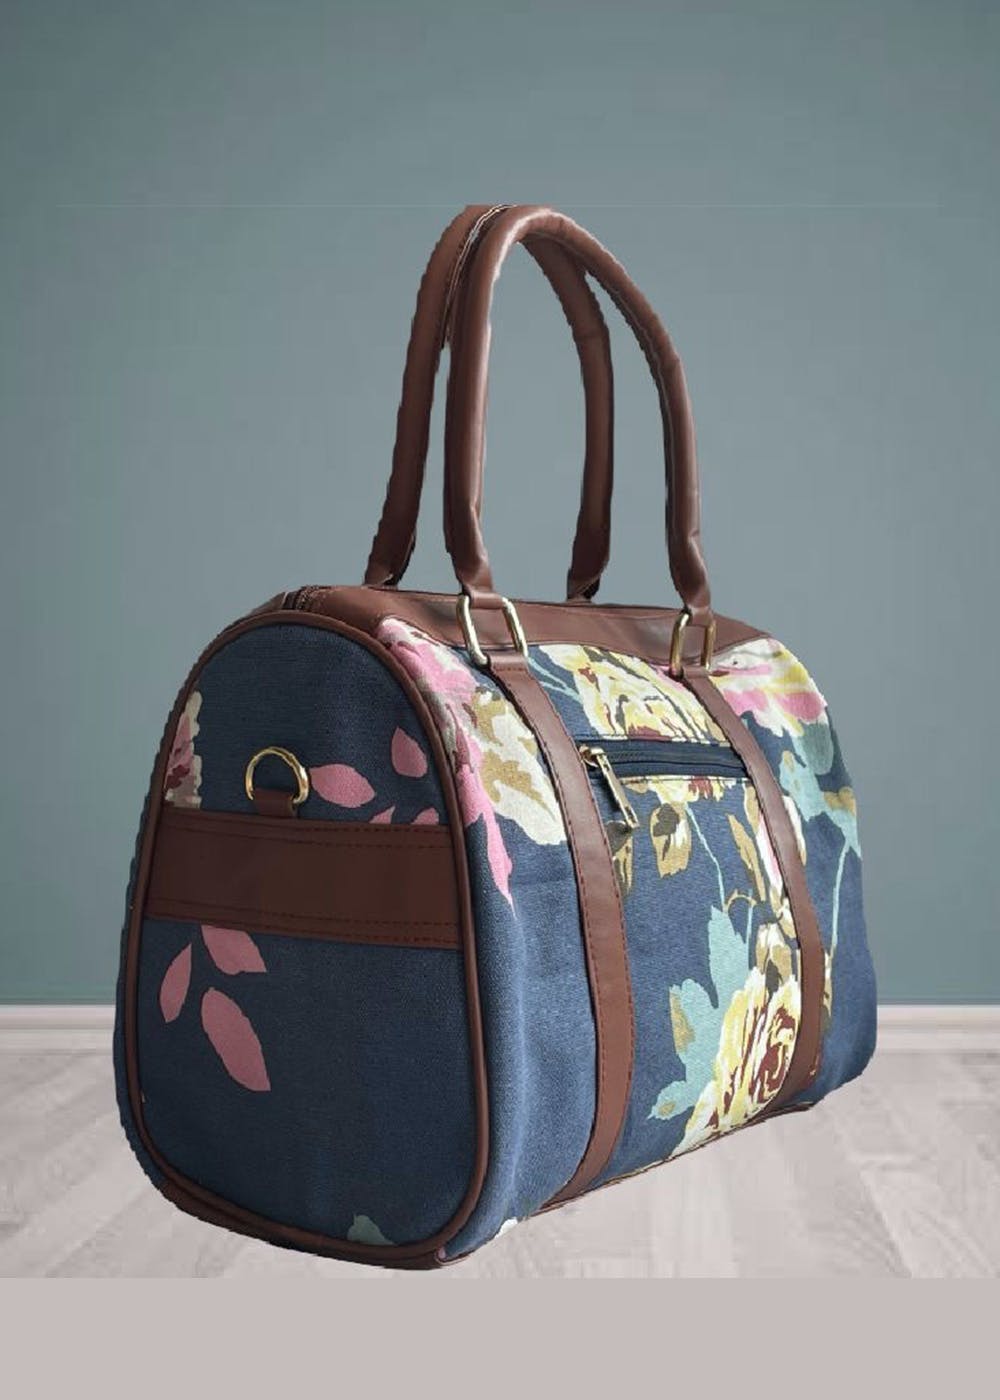 Pu Flower Printed Material White With Flower Print Shoulder Travel Bags